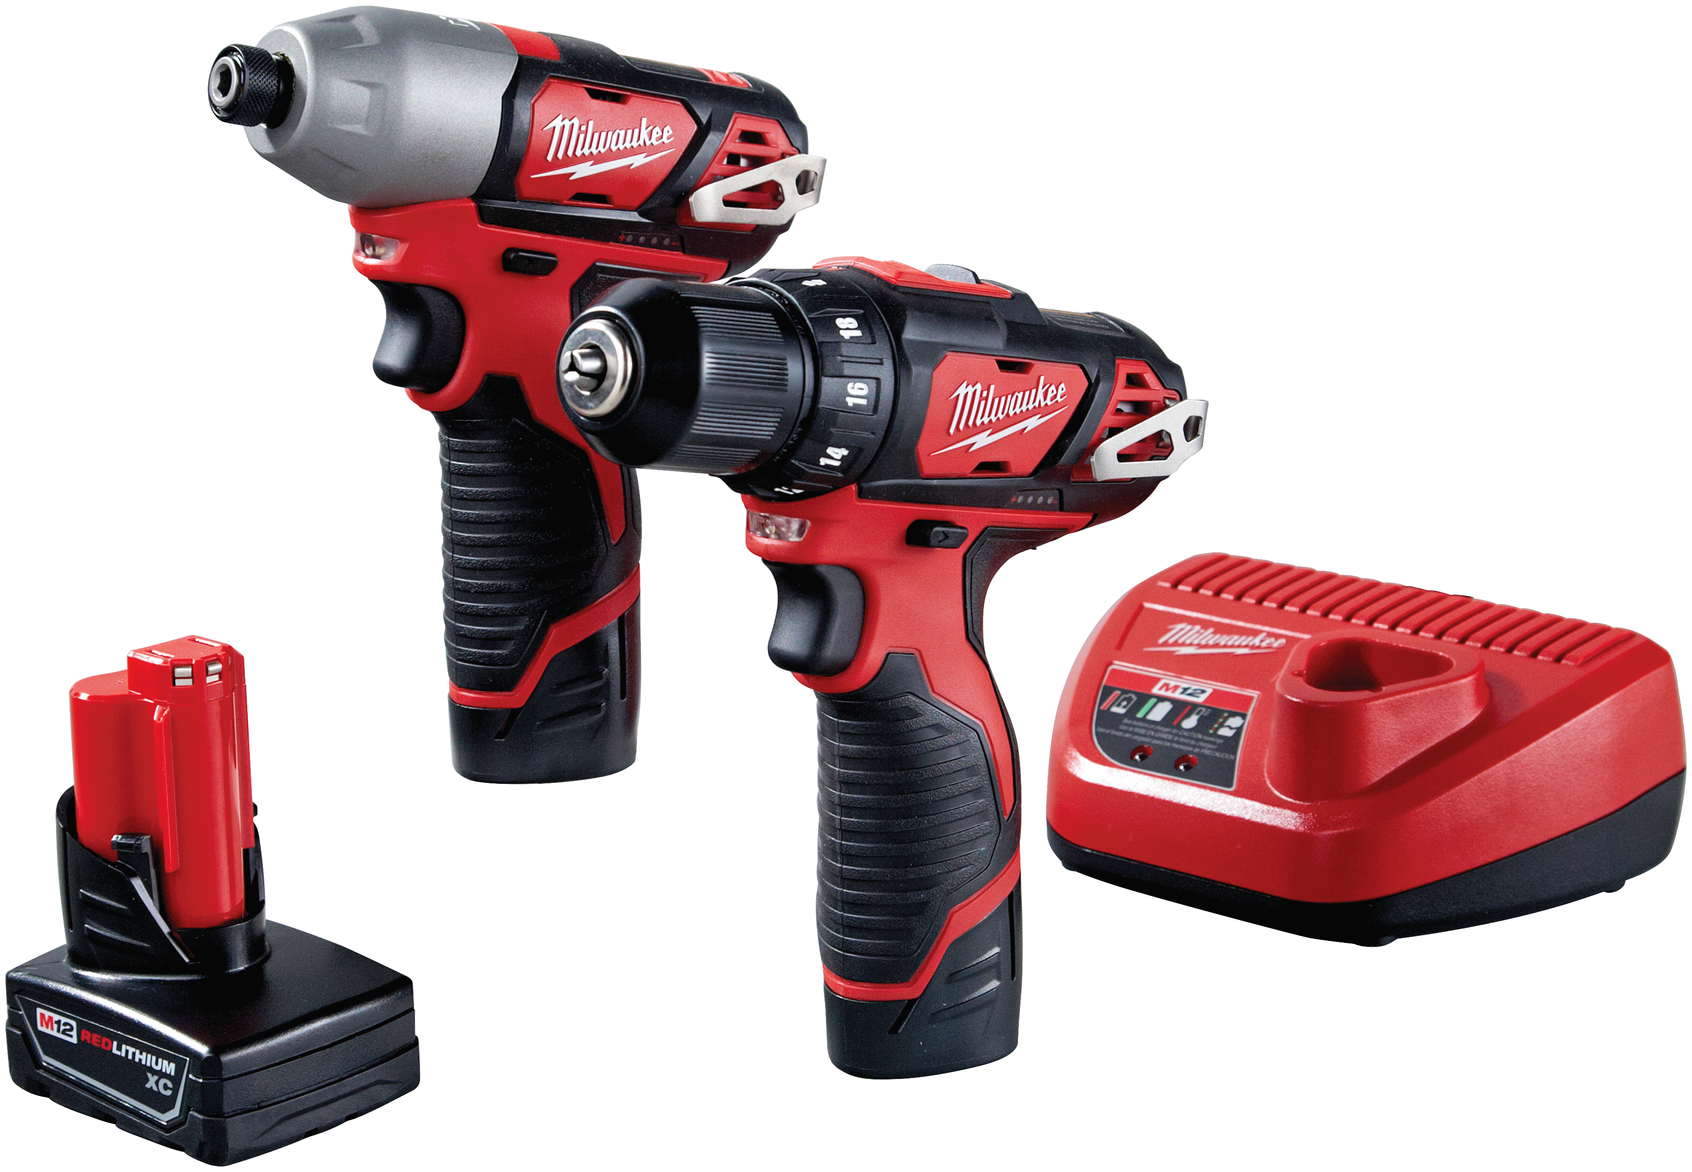 Milwaukee drill and impact driver